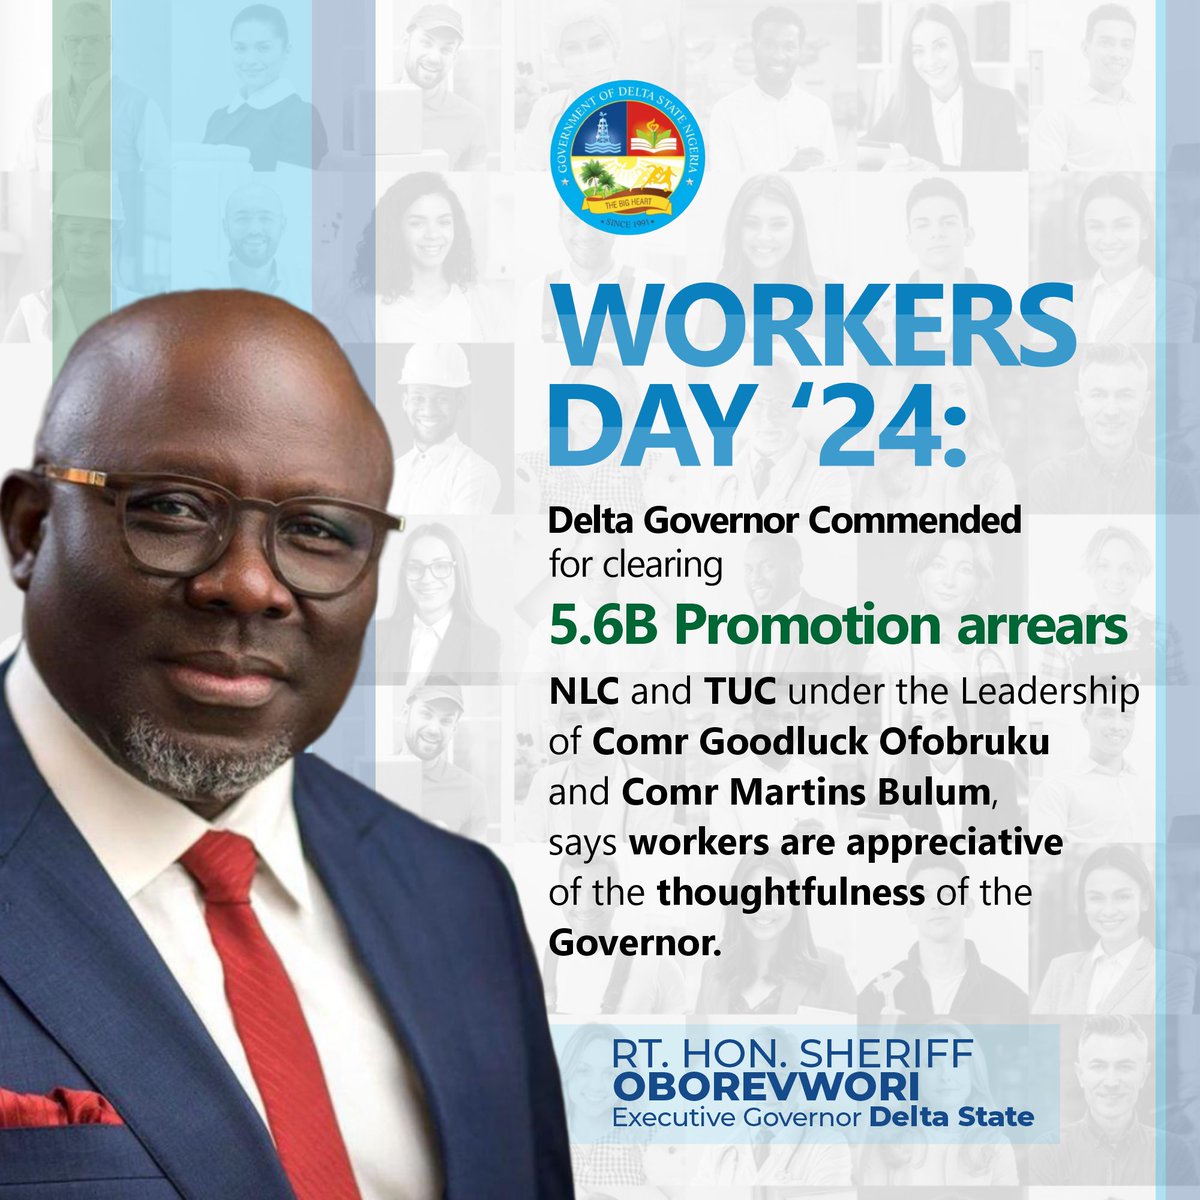 The Amiable Governor of Delta State, @RtHonSheriff Continues to display unrepentant commitment to workers welfare in Delta State.

#WorkersDay 
#Deltastate
#Sheriffcares